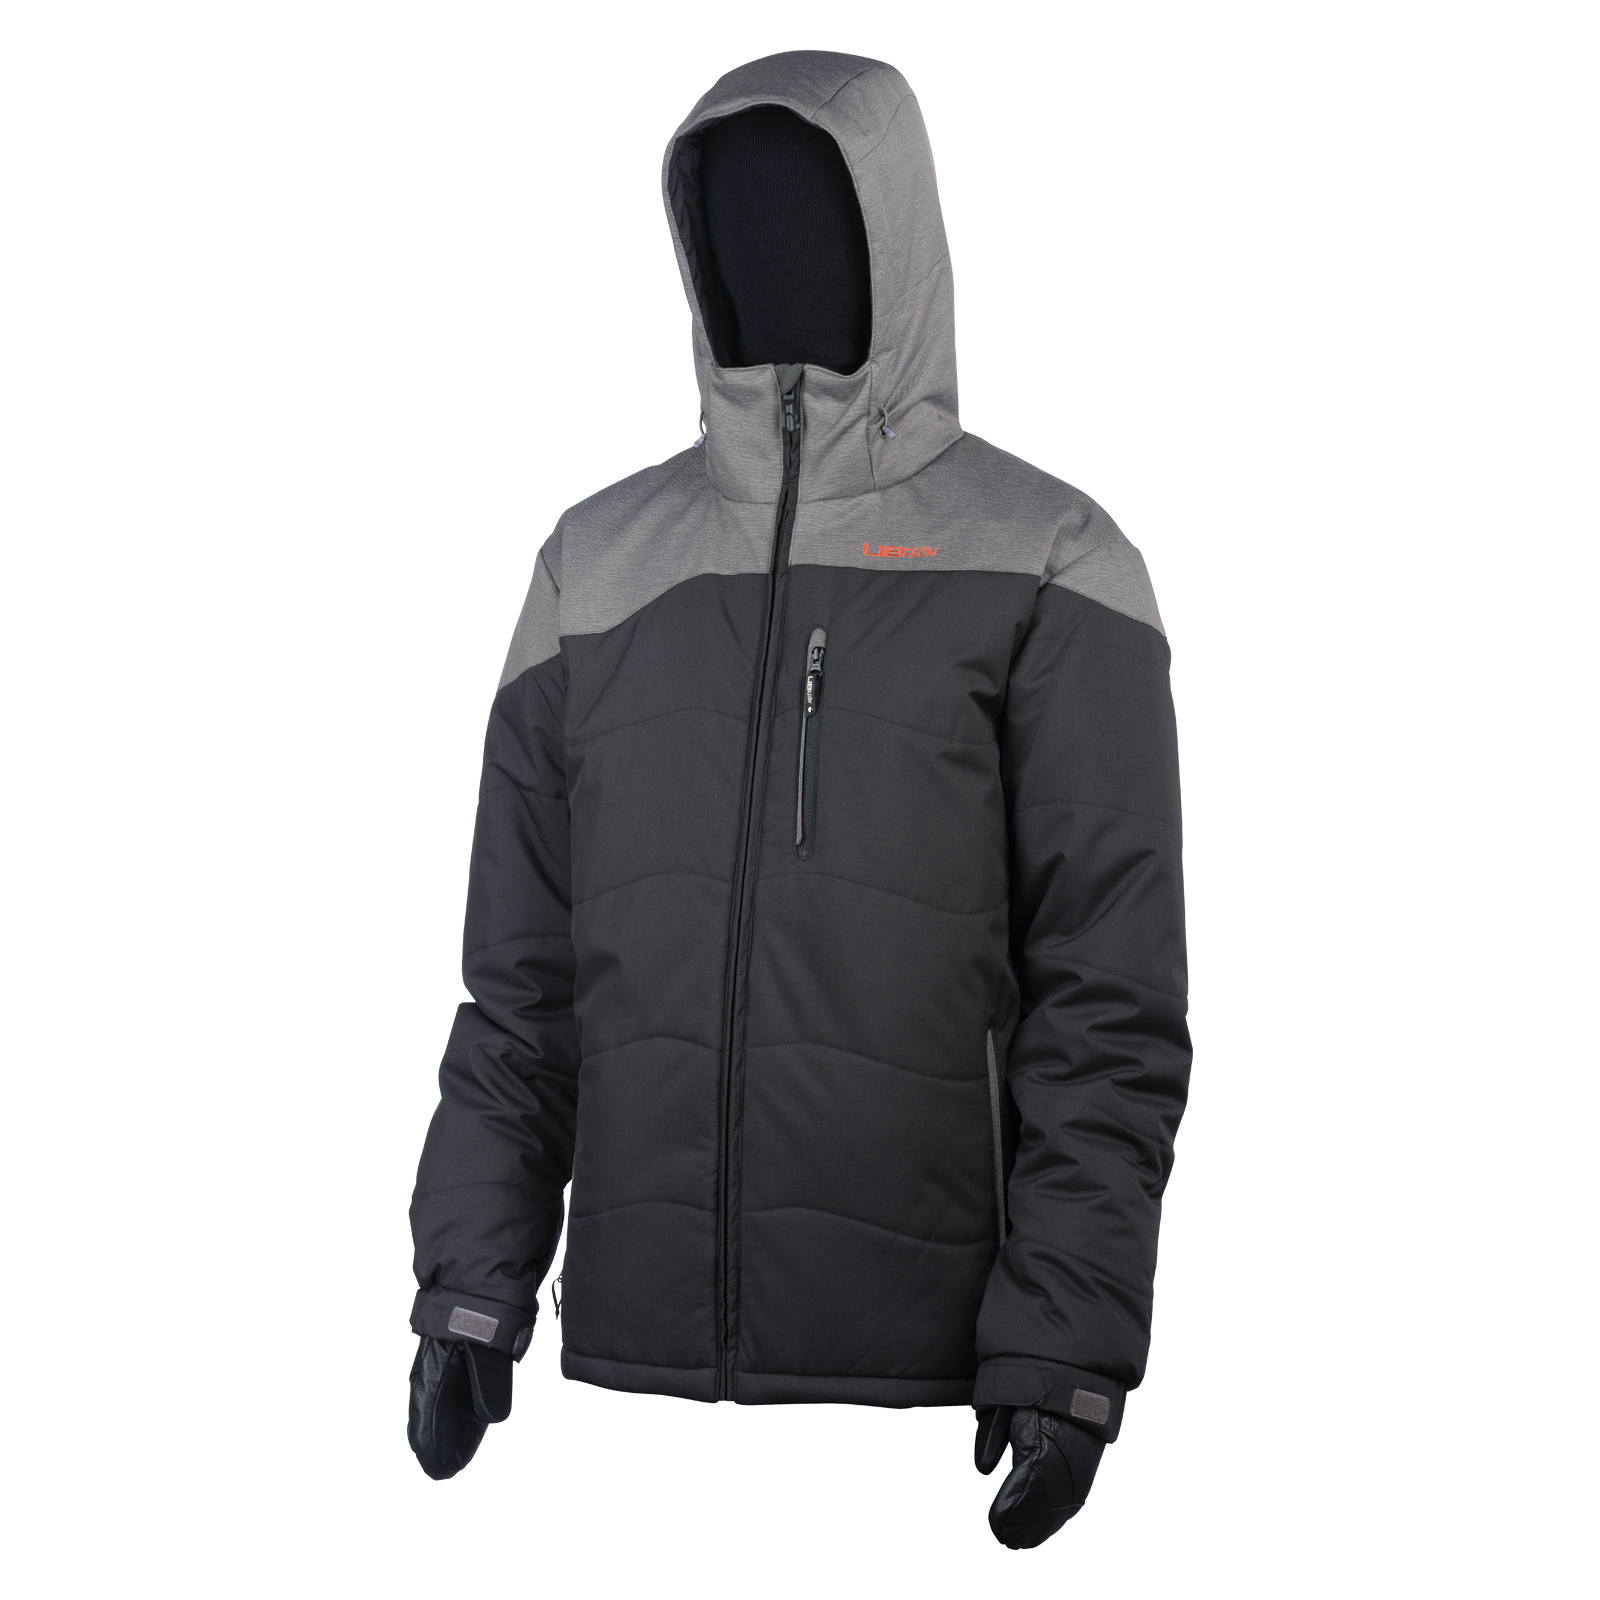 Image of snow jacket for sale